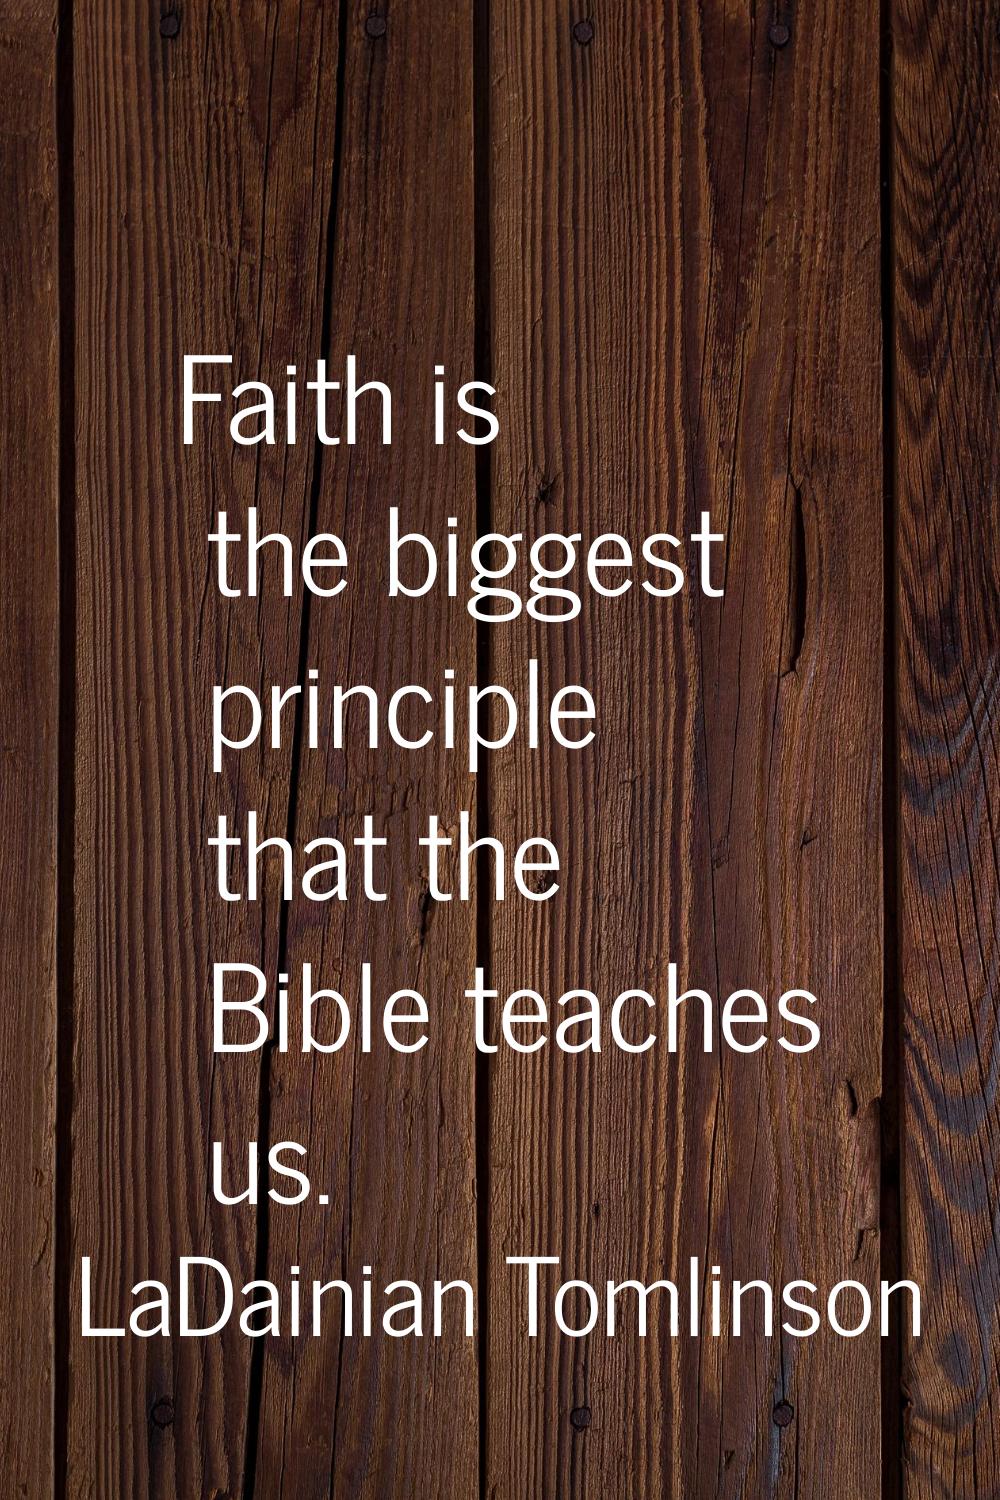 Faith is the biggest principle that the Bible teaches us.